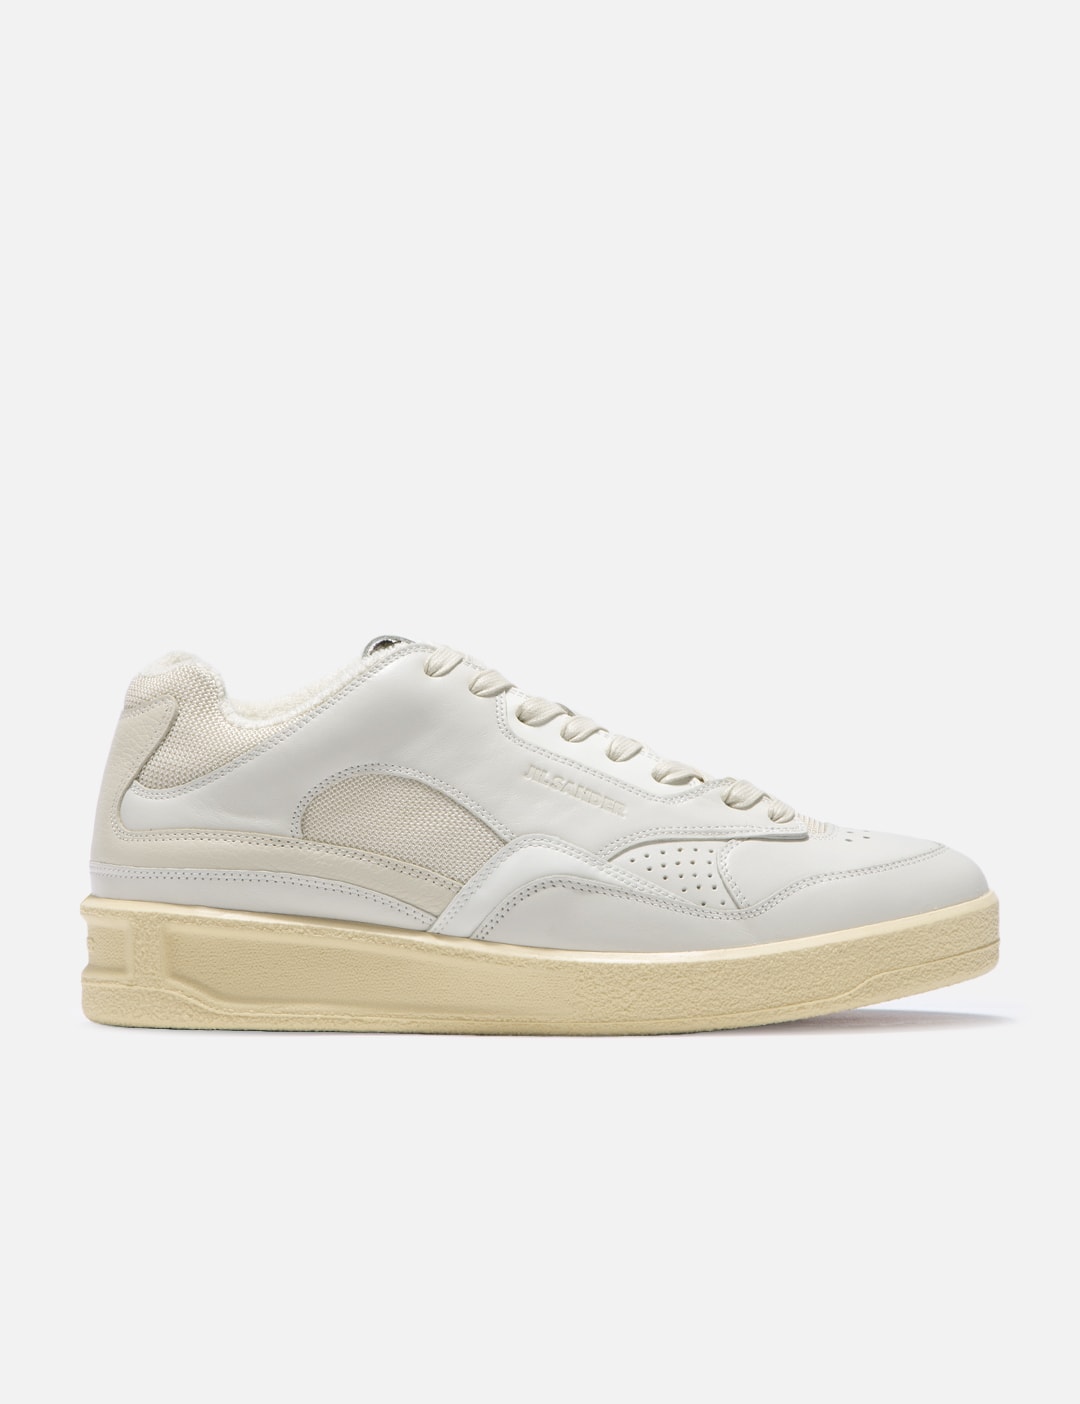 Jil Sander - Low-top Sneakers | HBX - Globally Curated Fashion and ...